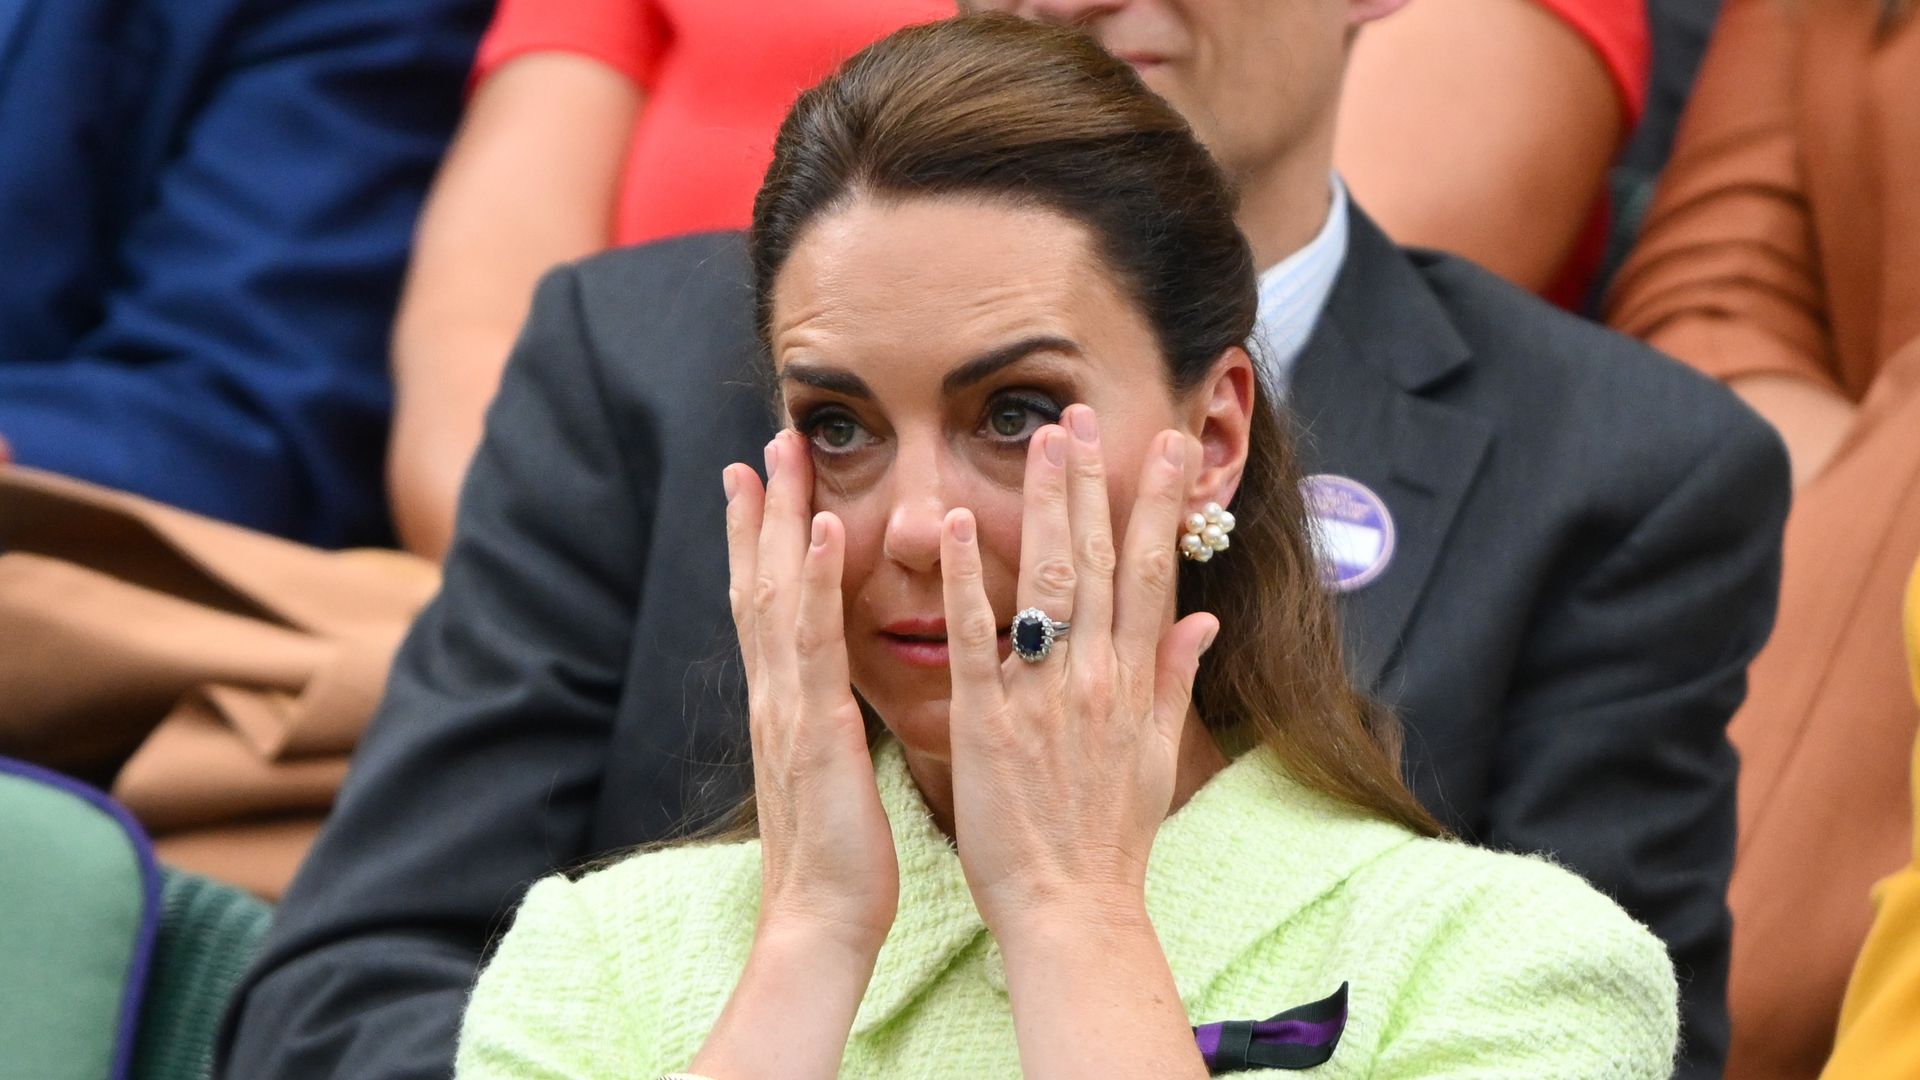 Why people might’ve thought Kate Middleton was crying | Woman & Home